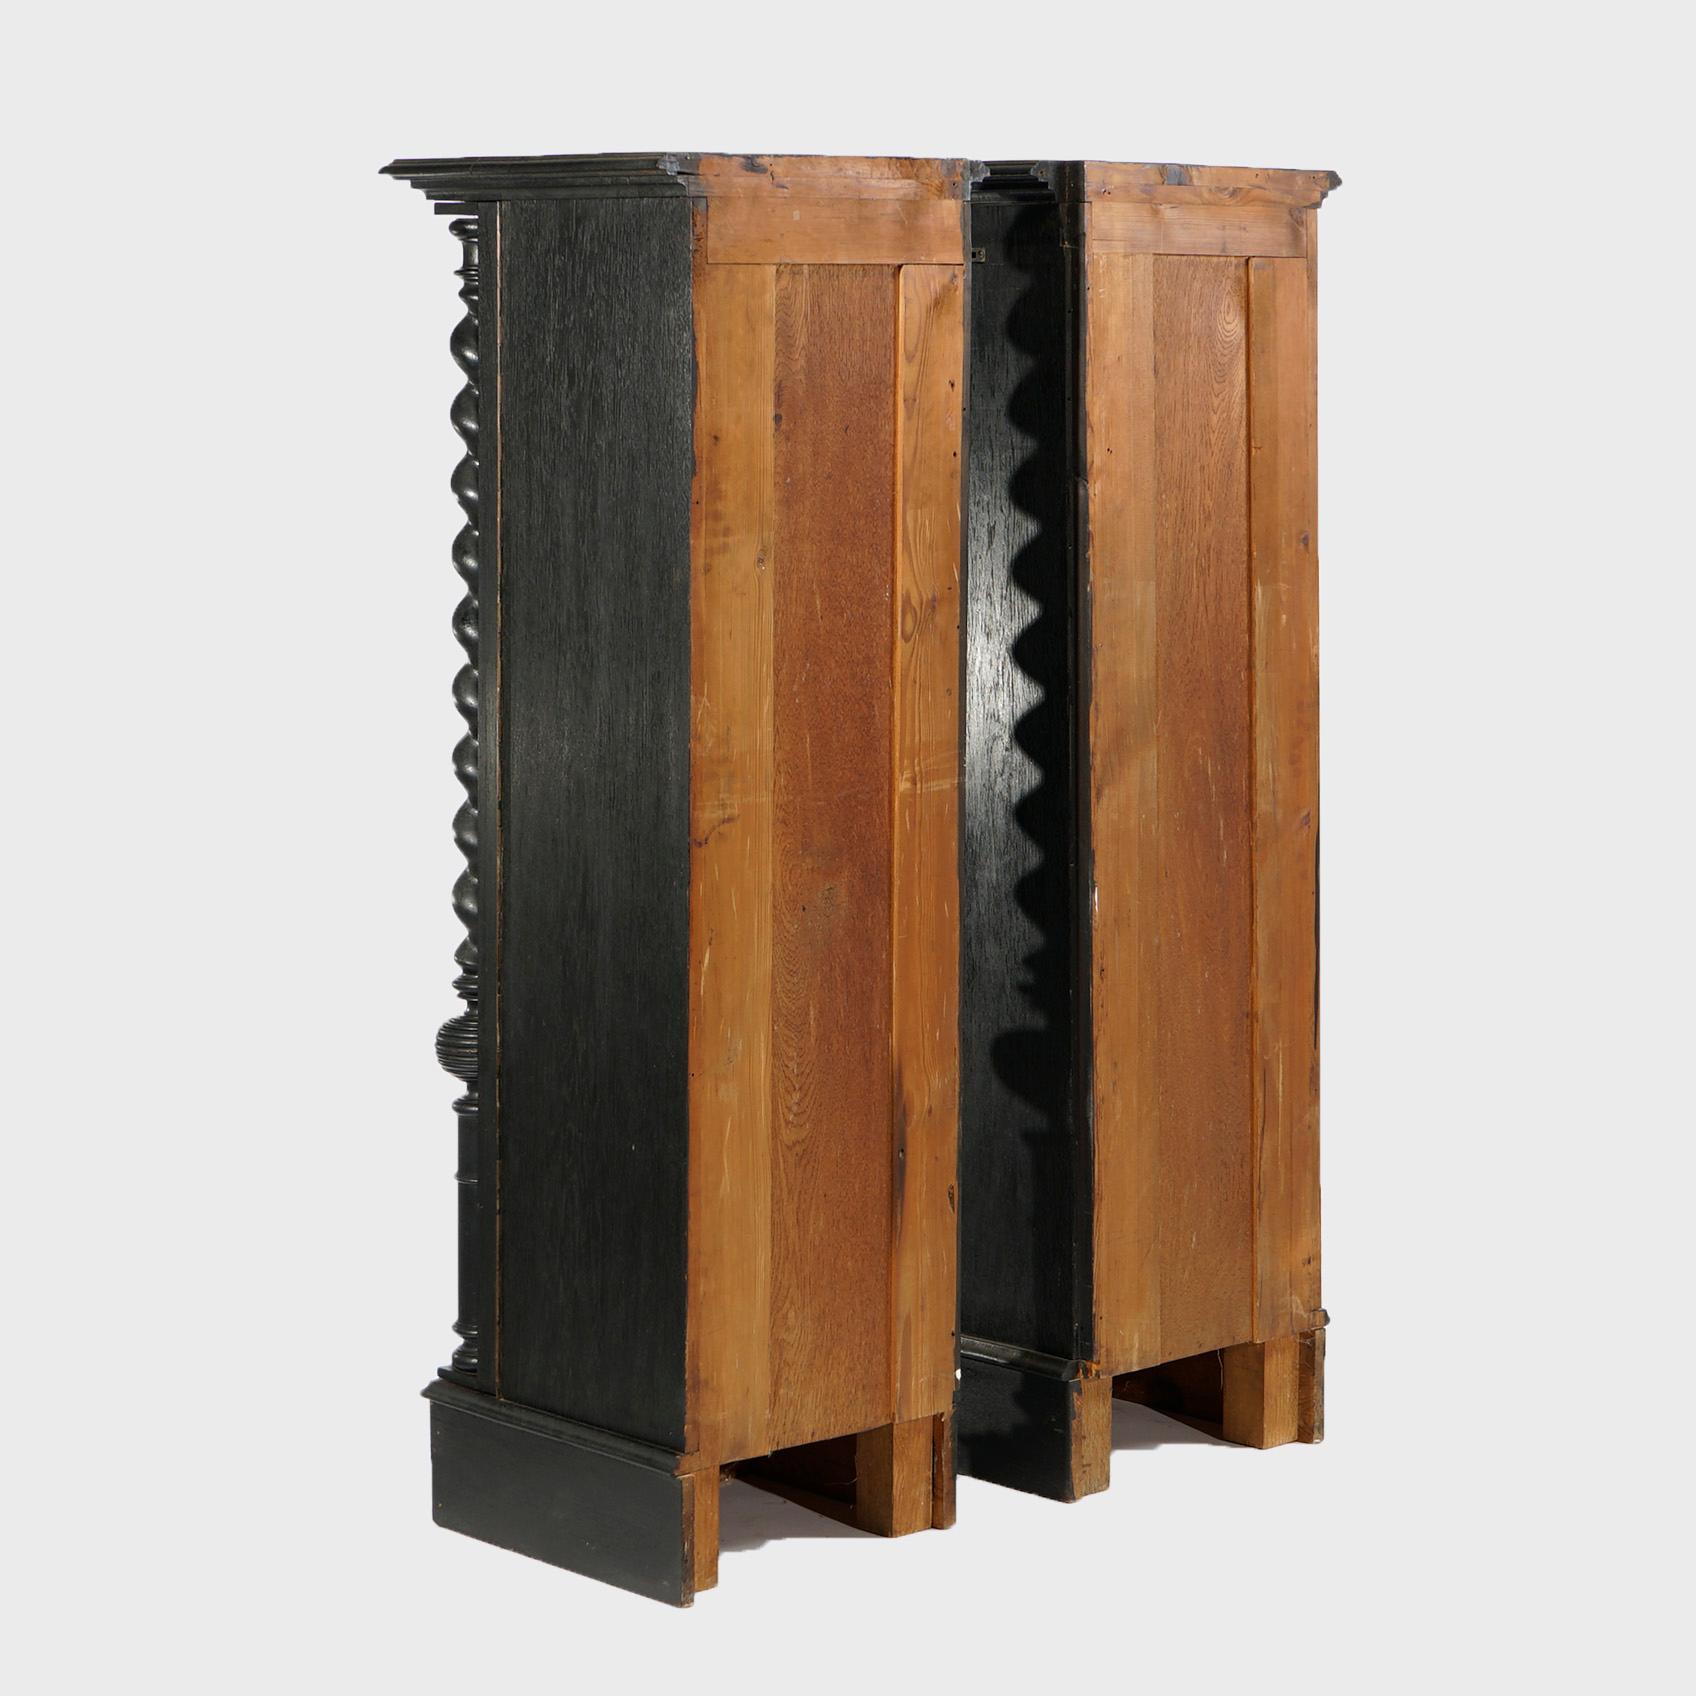 20th Century Antique Elizabethan Style English Oak Leaded Glass Tall Bookcase Cabinets, c1900